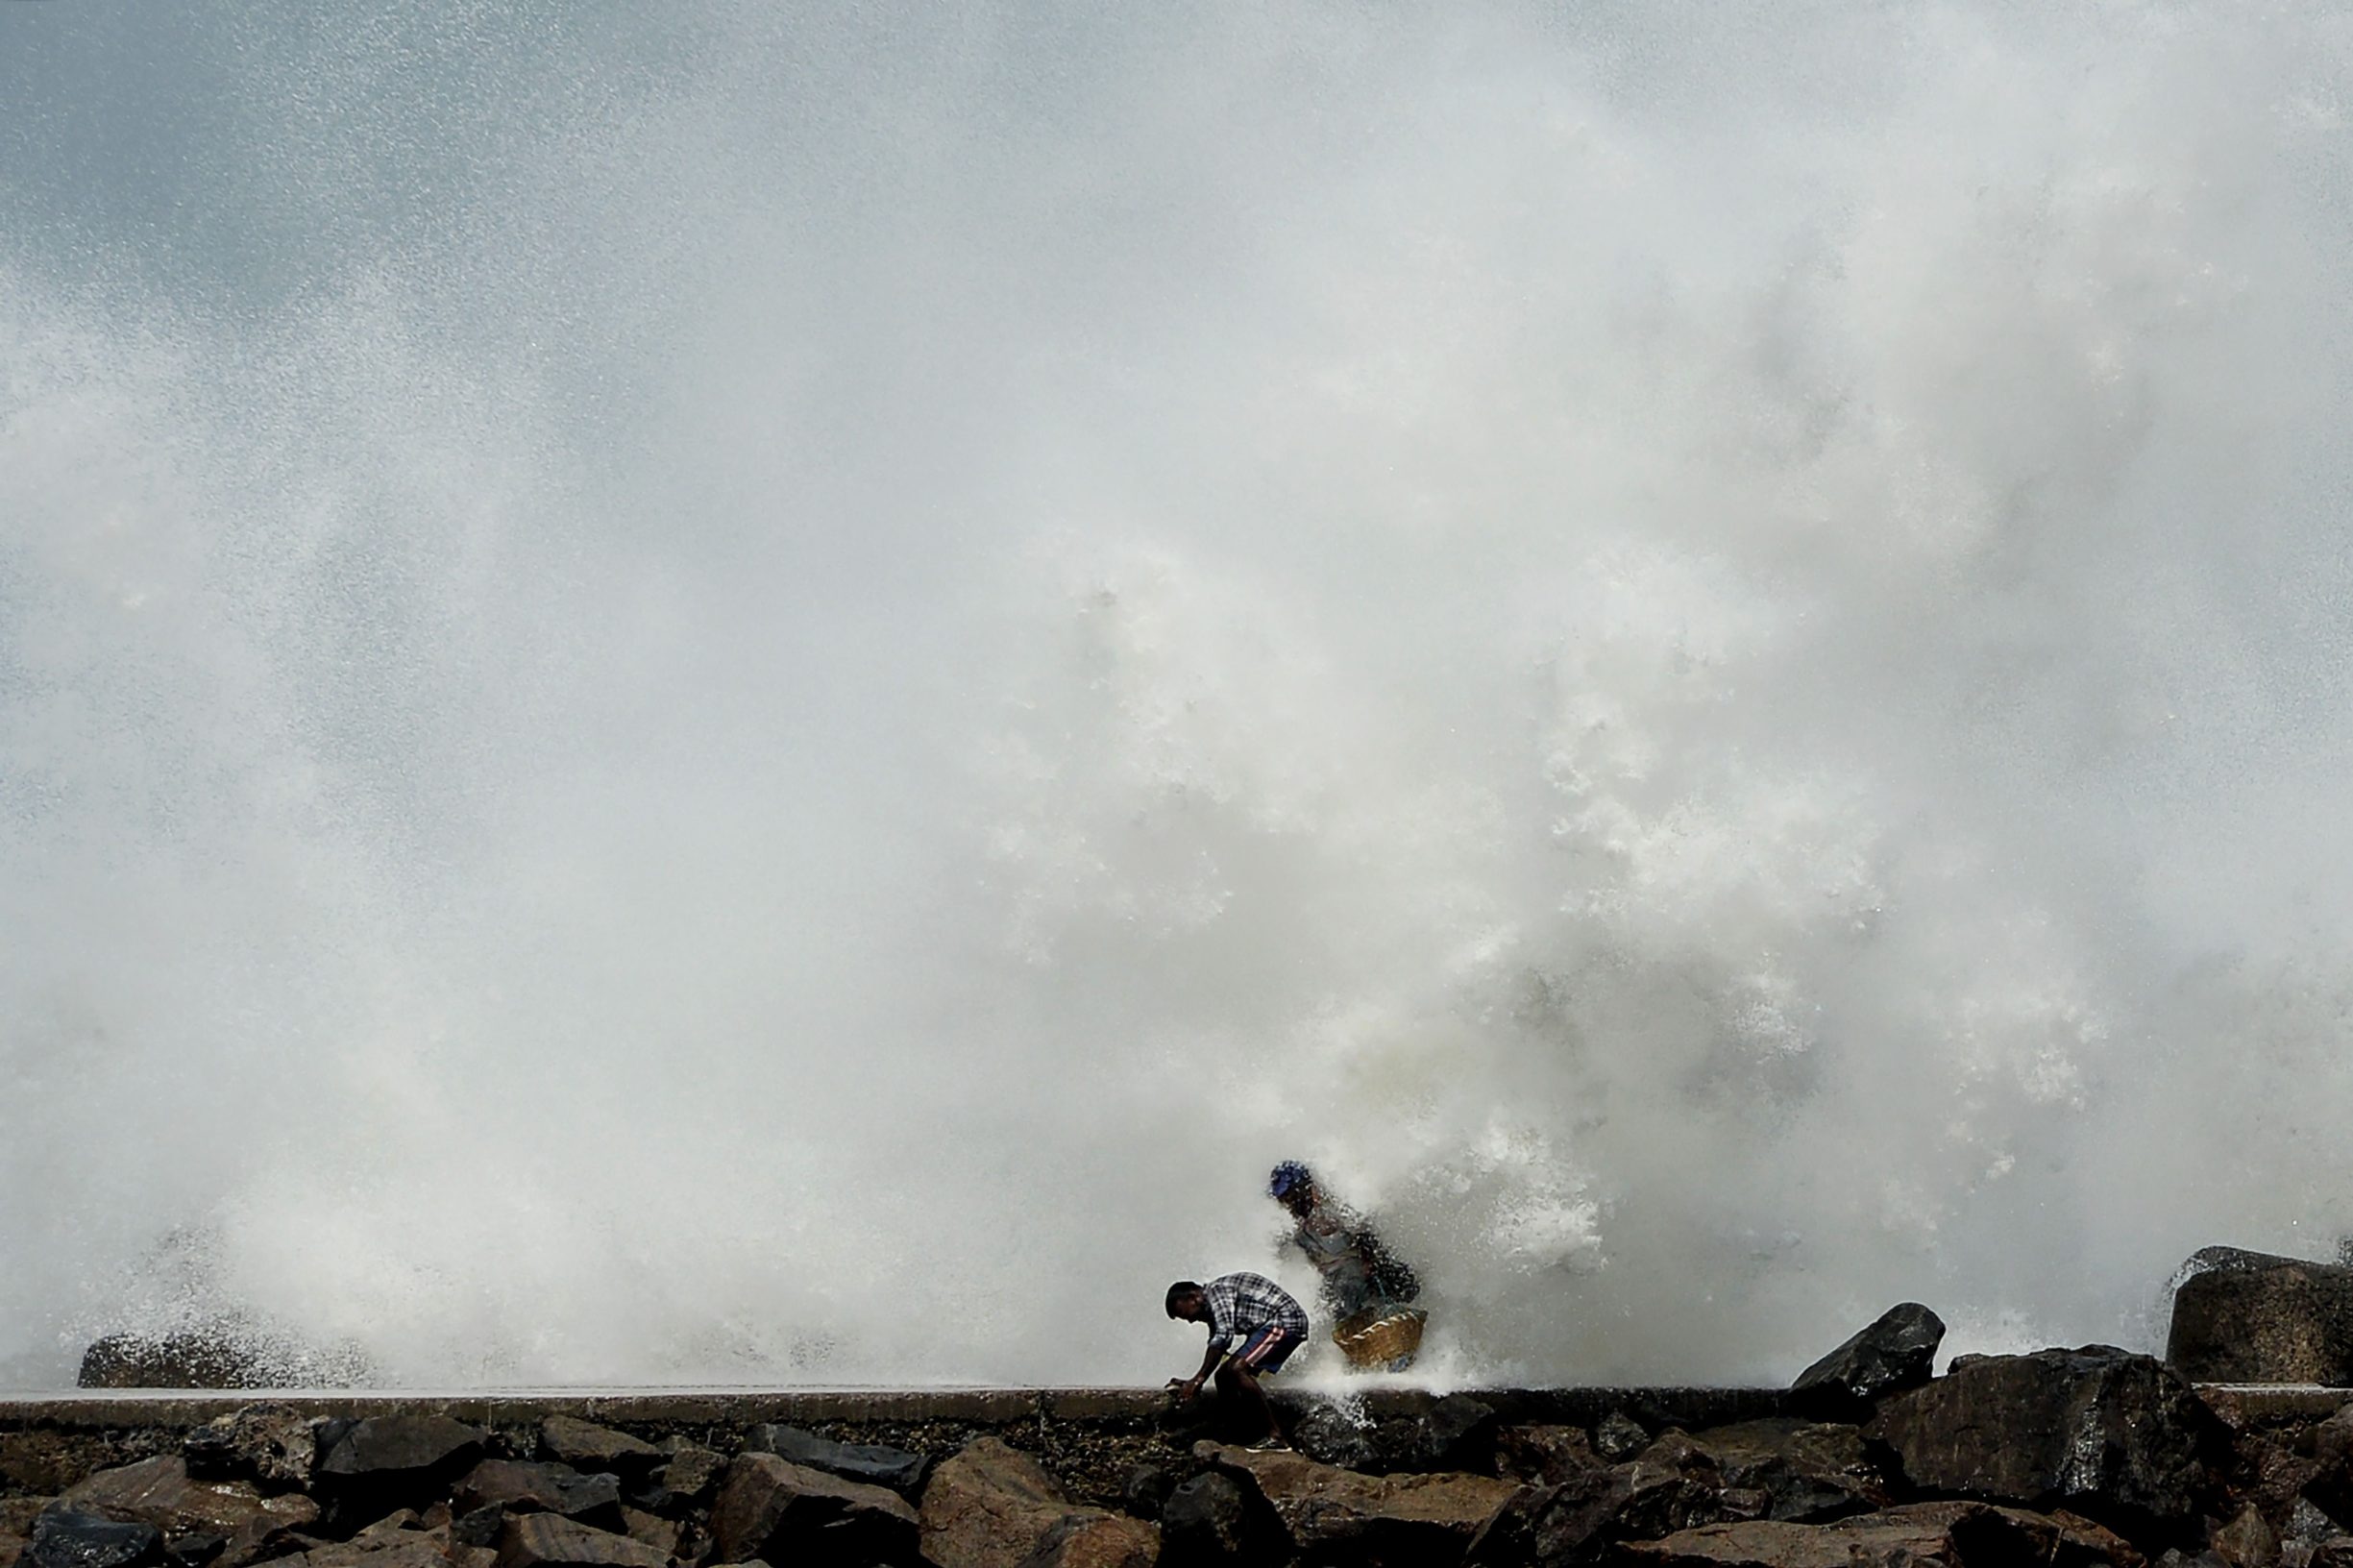 TOPSHOT - Men walk past as waves hit a breakwater at Kasimedu fishing harbour in Chennai on May 19, 2020, as Cyclone Amphan barrels towards India's eastern coast. - Millions of people were being moved to safety on May 19 as one of the fiercest cyclones in decades barrelled towards India and Bangladesh, with evacuation plans complicated by coronavirus precautions. Both countries are under various stages of lockdown because of the disease, with infections still surging. (Photo by Arun SANKAR / AFP)